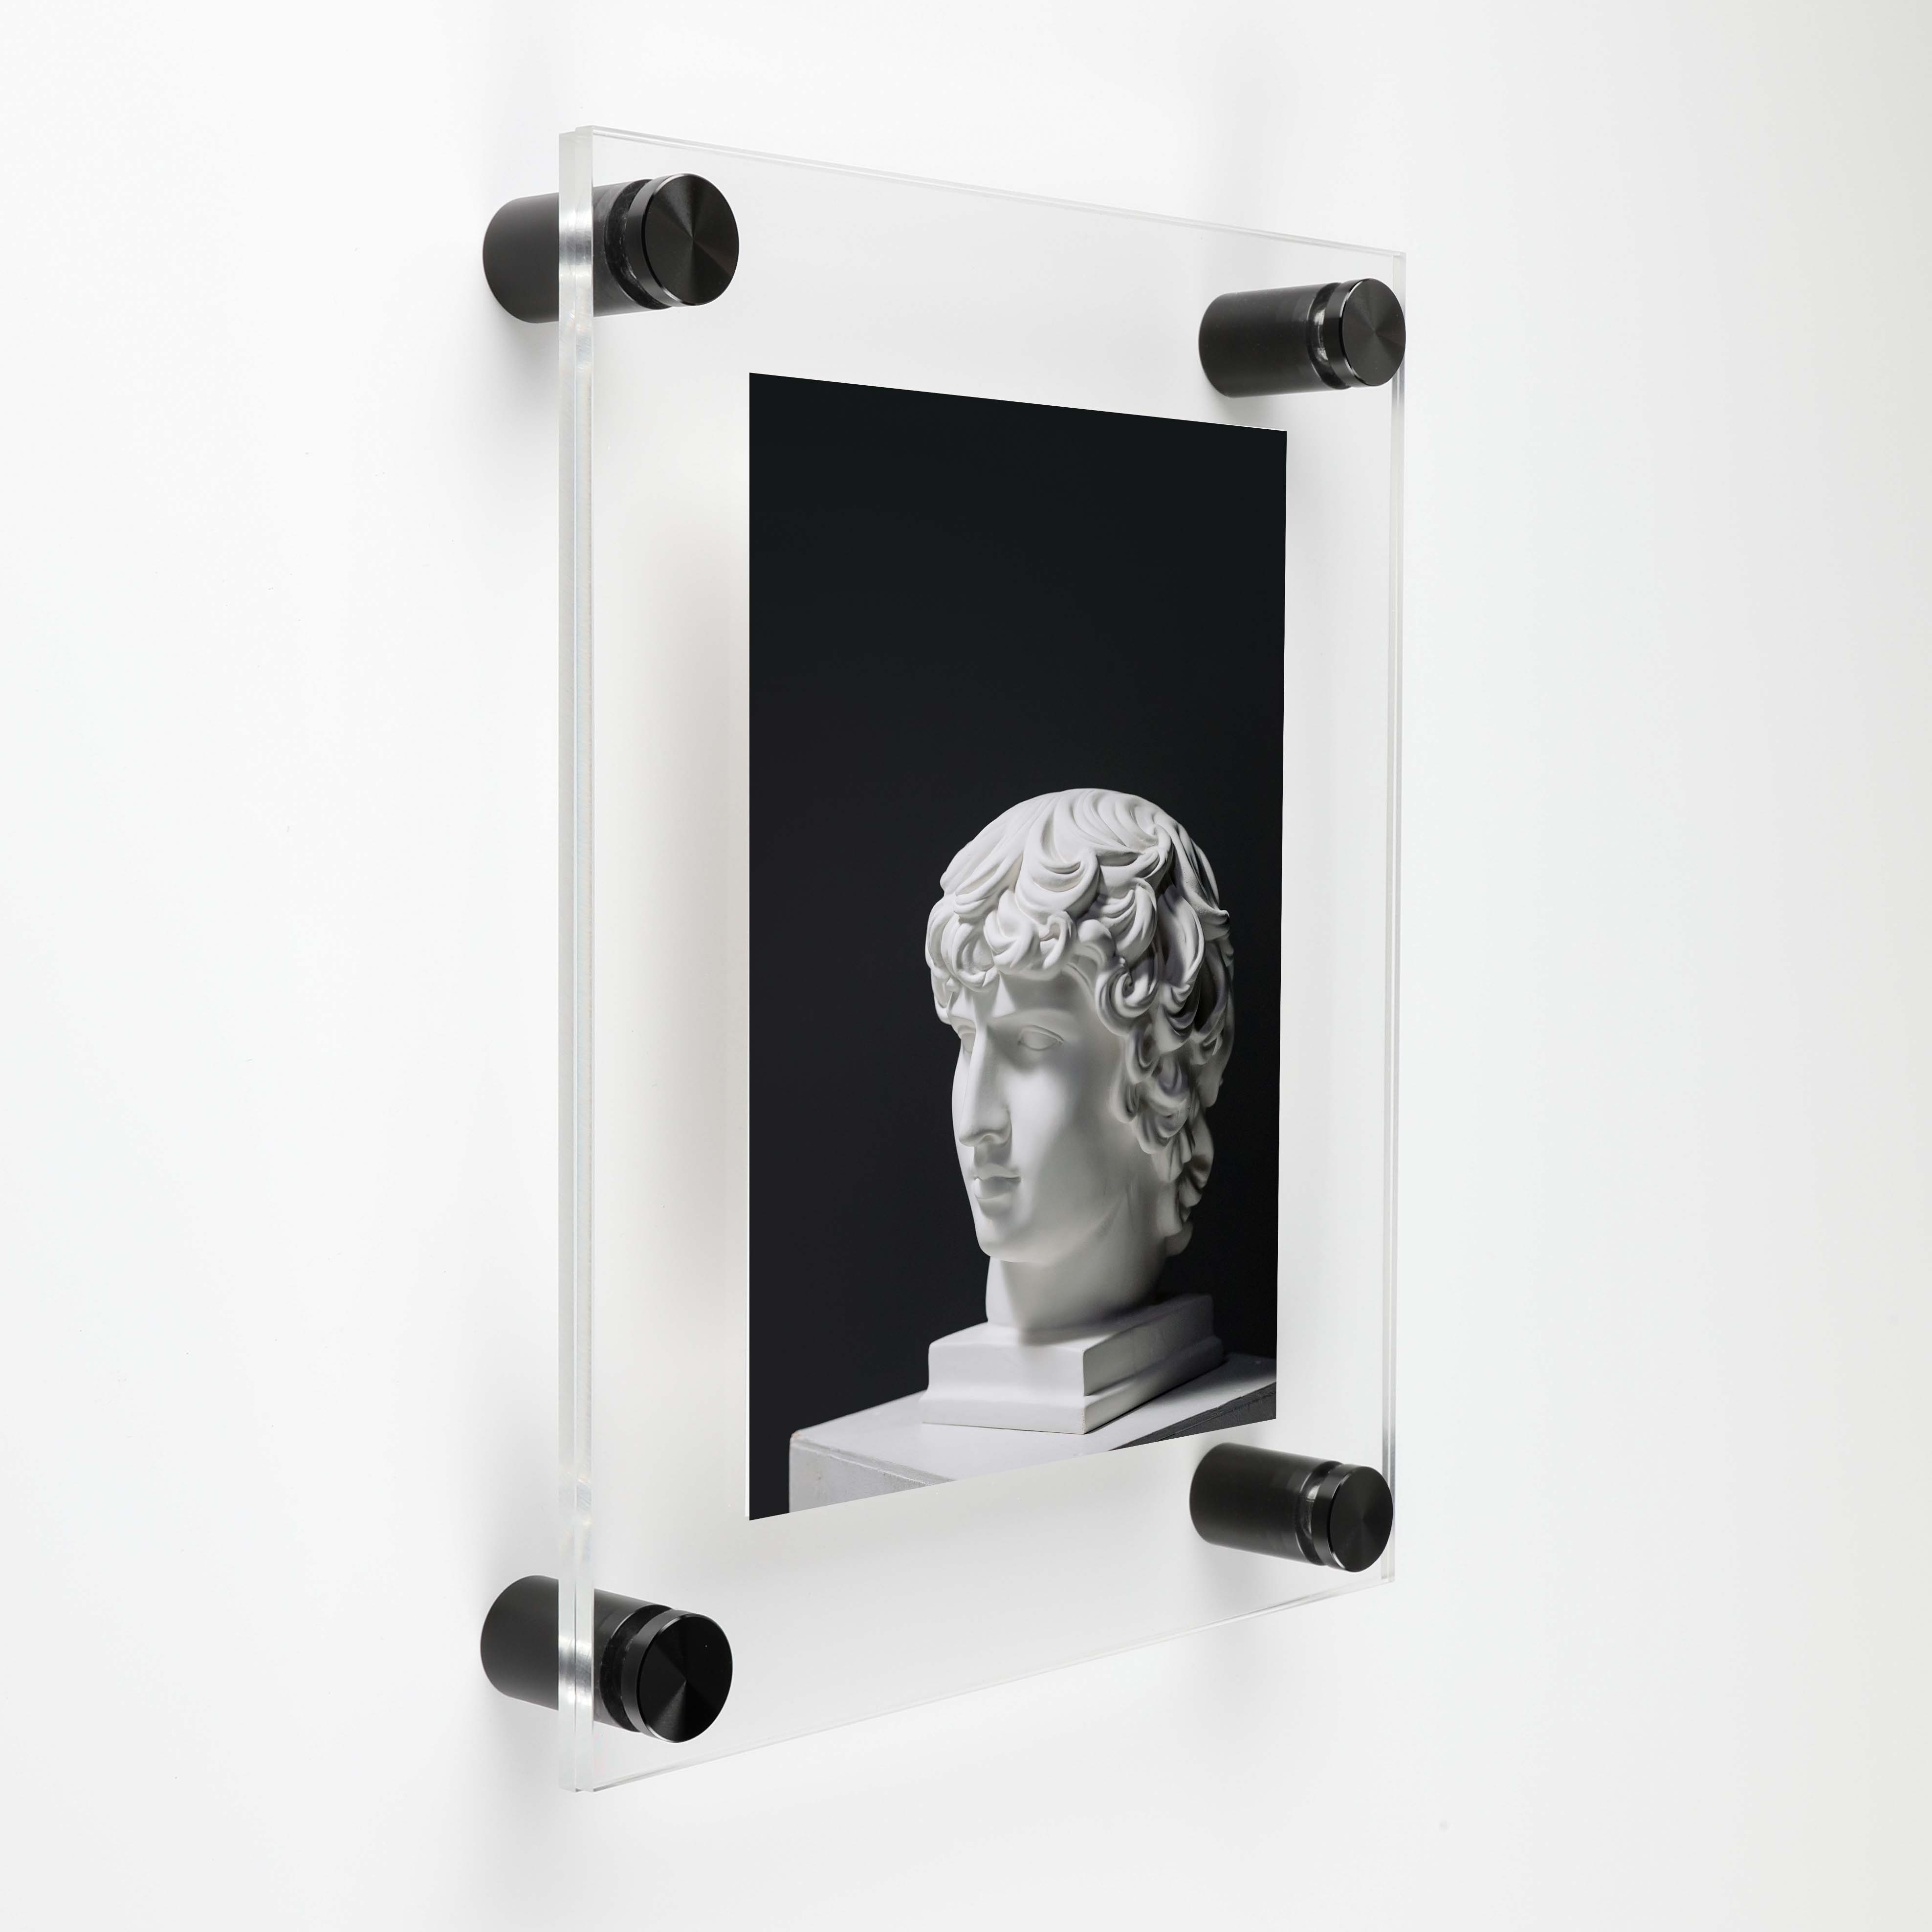 (2) 19-3/4'' x 26'' Clear Acrylics , Pre-Drilled With Polished Edges (Thick 3/16'' each), Wall Frame with (4) 5/8'' x 1'' Black Anodized Aluminum Standoffs includes Screws and Anchors